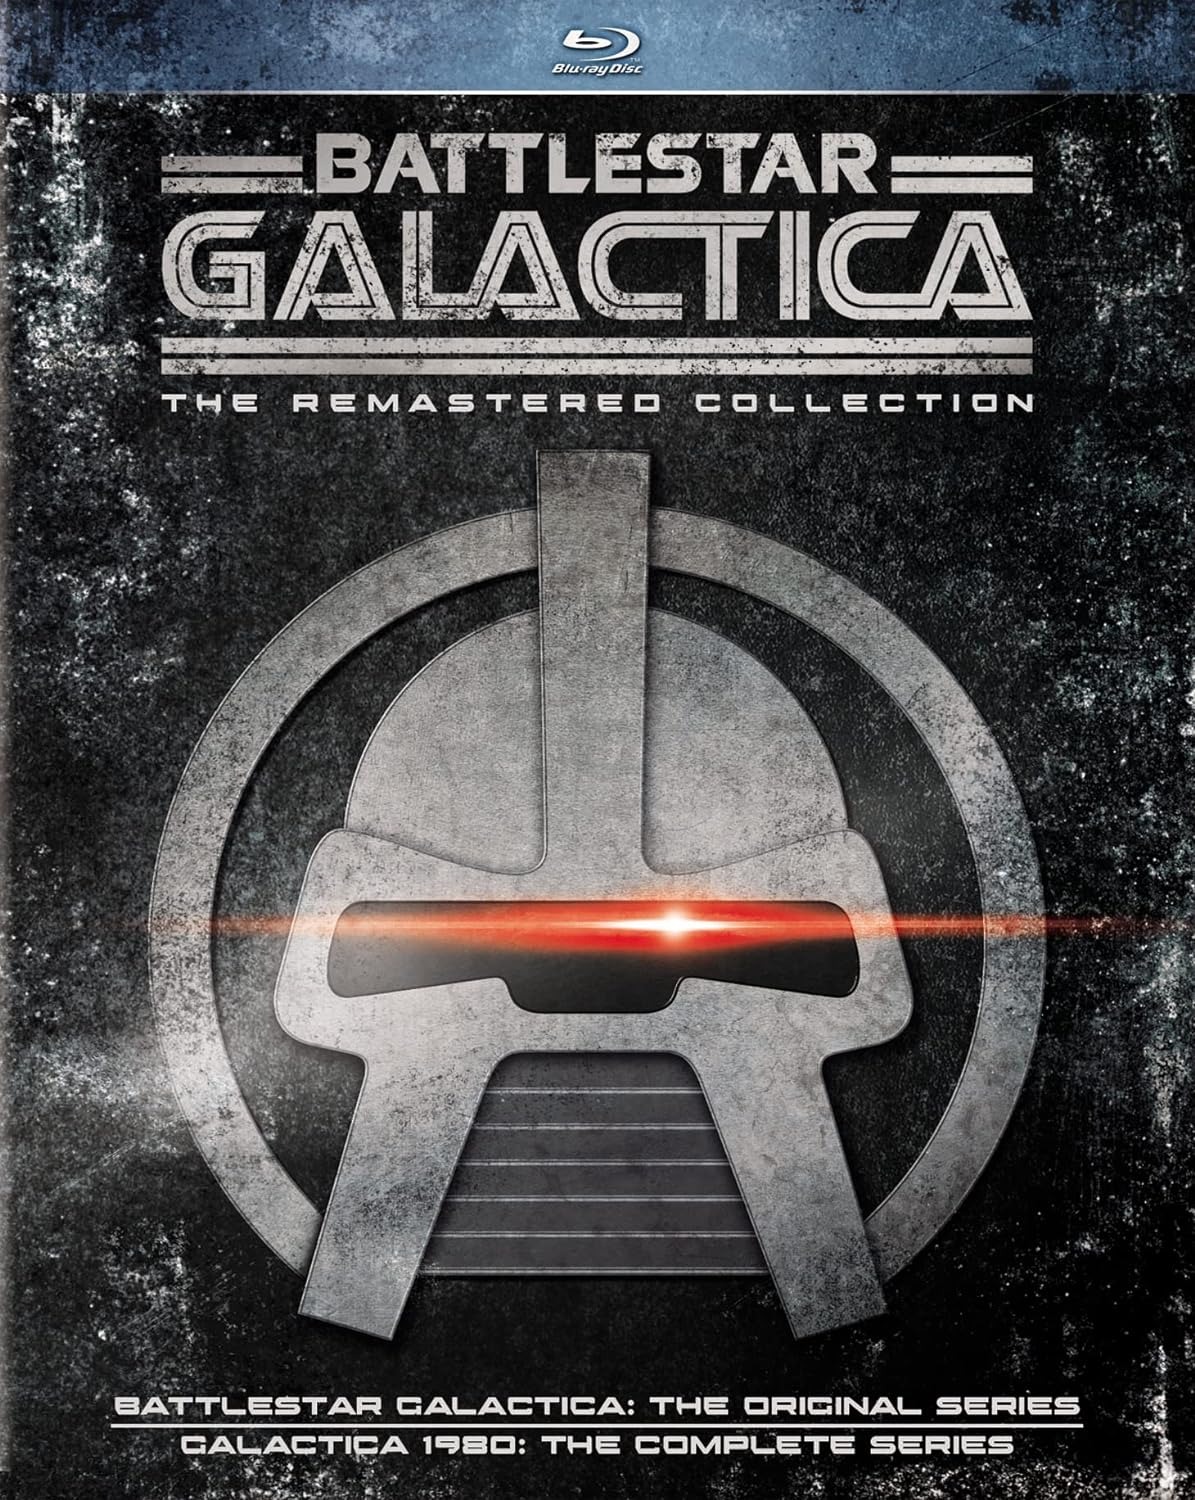 $30: Battlestar Galactica (The Remastered Collection)